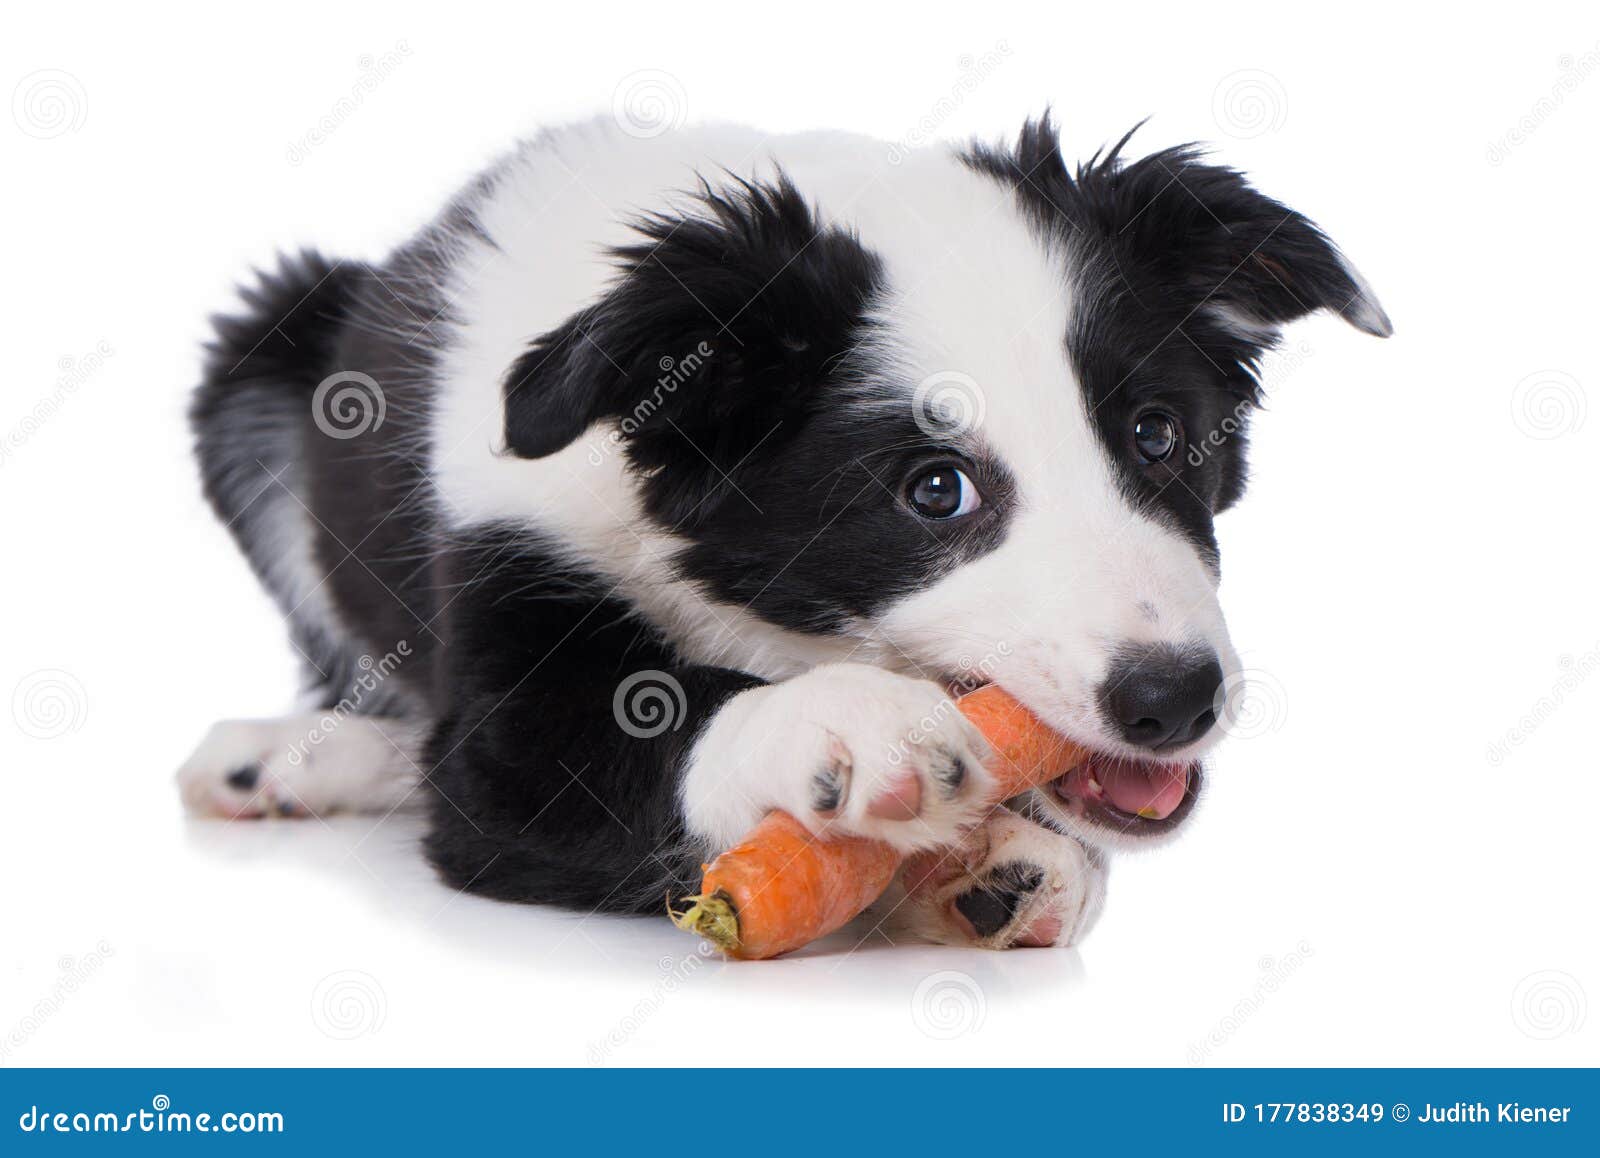 Cute Border Collie Puppy With A Carrot Stock Image Image